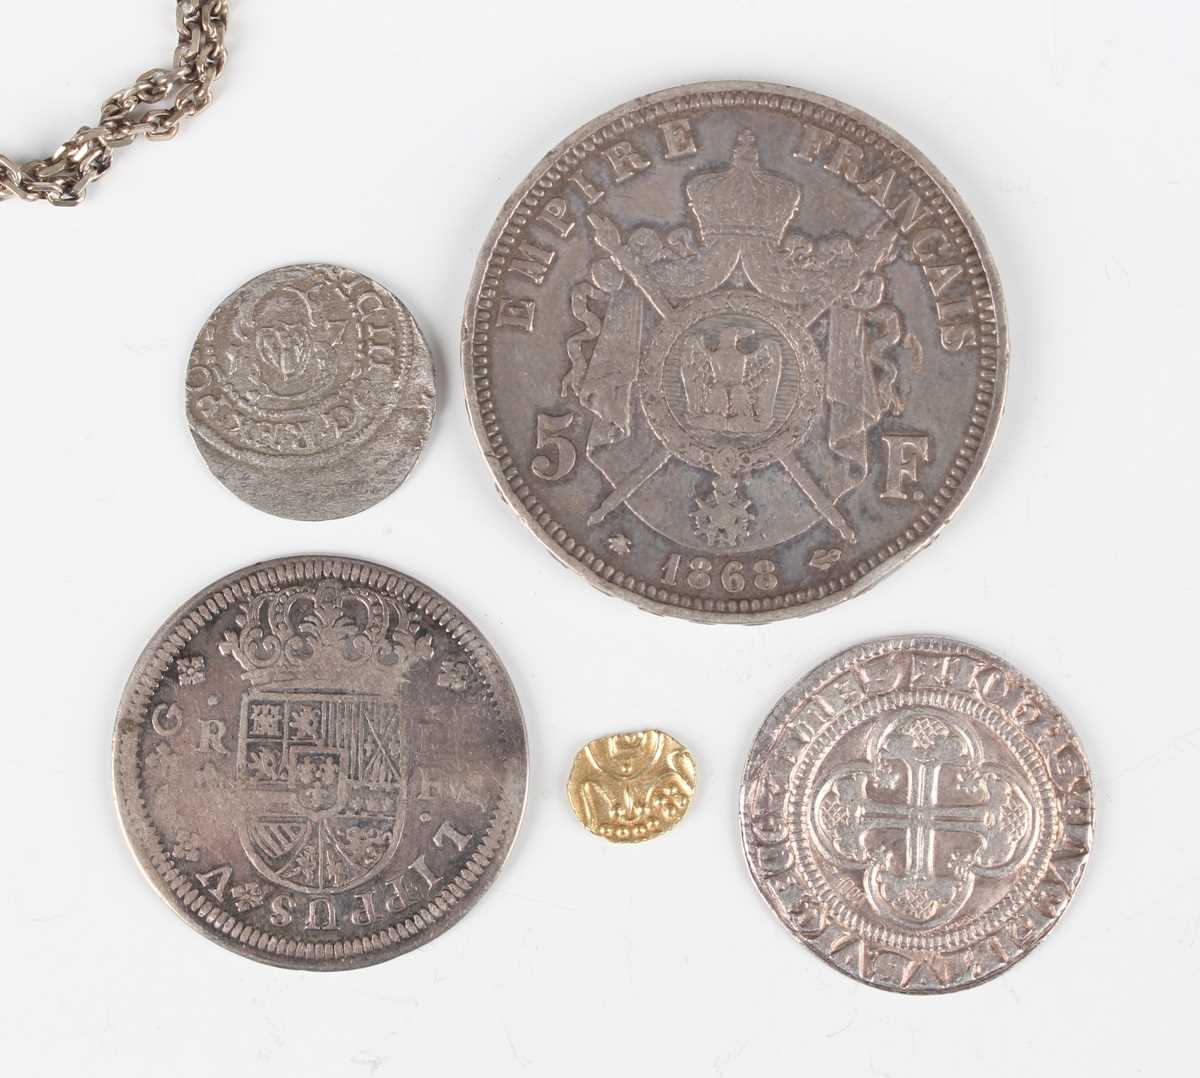 An India gold fanam, probably 18th century, together with a group of European and world coinage, - Image 3 of 5